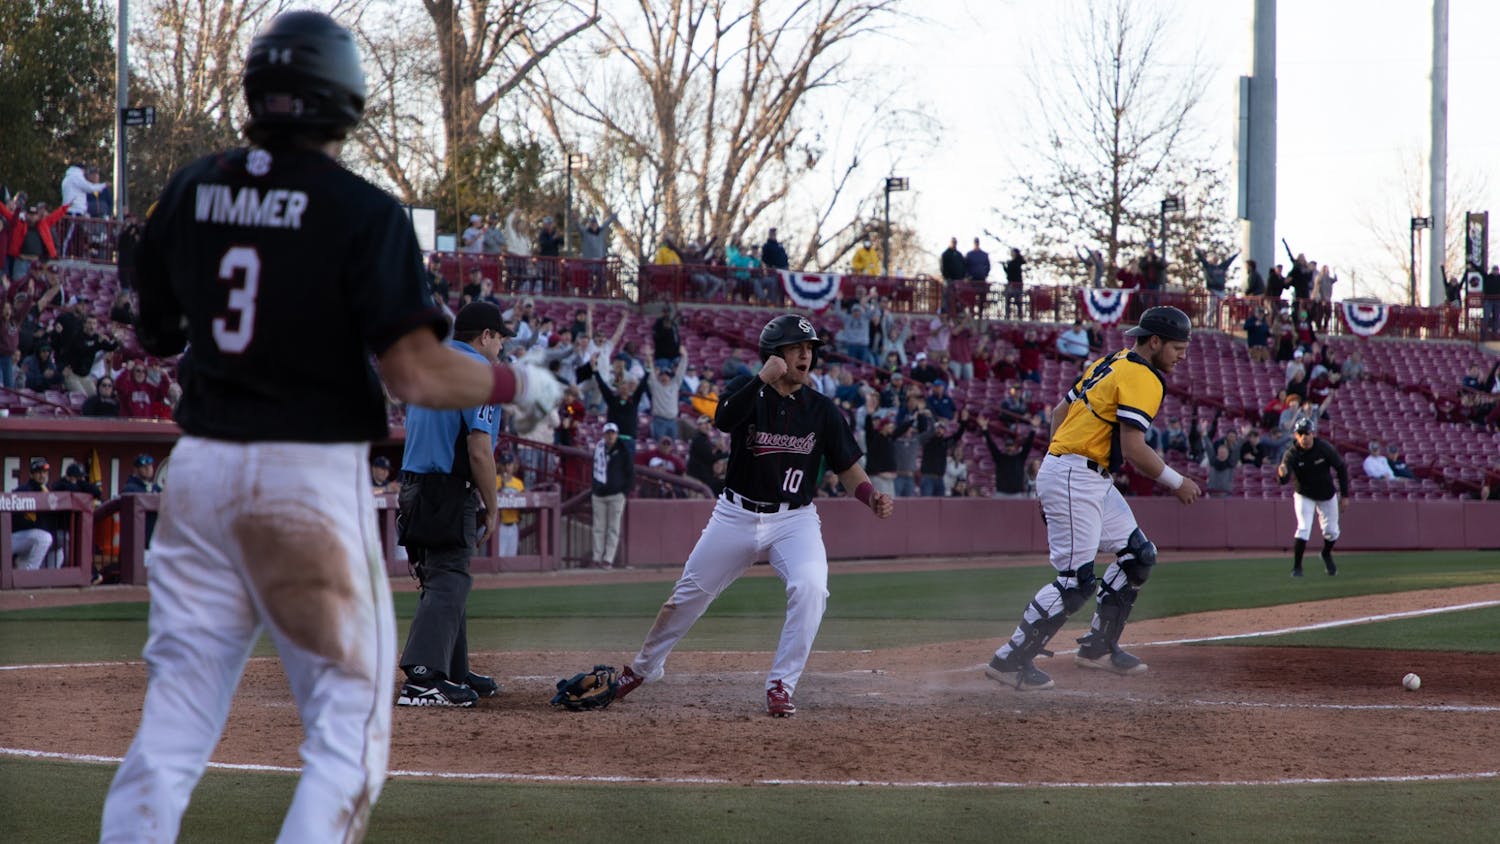 The Gamecock baseball team faced off against UNC Greensboro at Founders Park in their opening series. South Carolina won the series by beating UNCG in extra innings of its final game on Feb. 20, 2022.